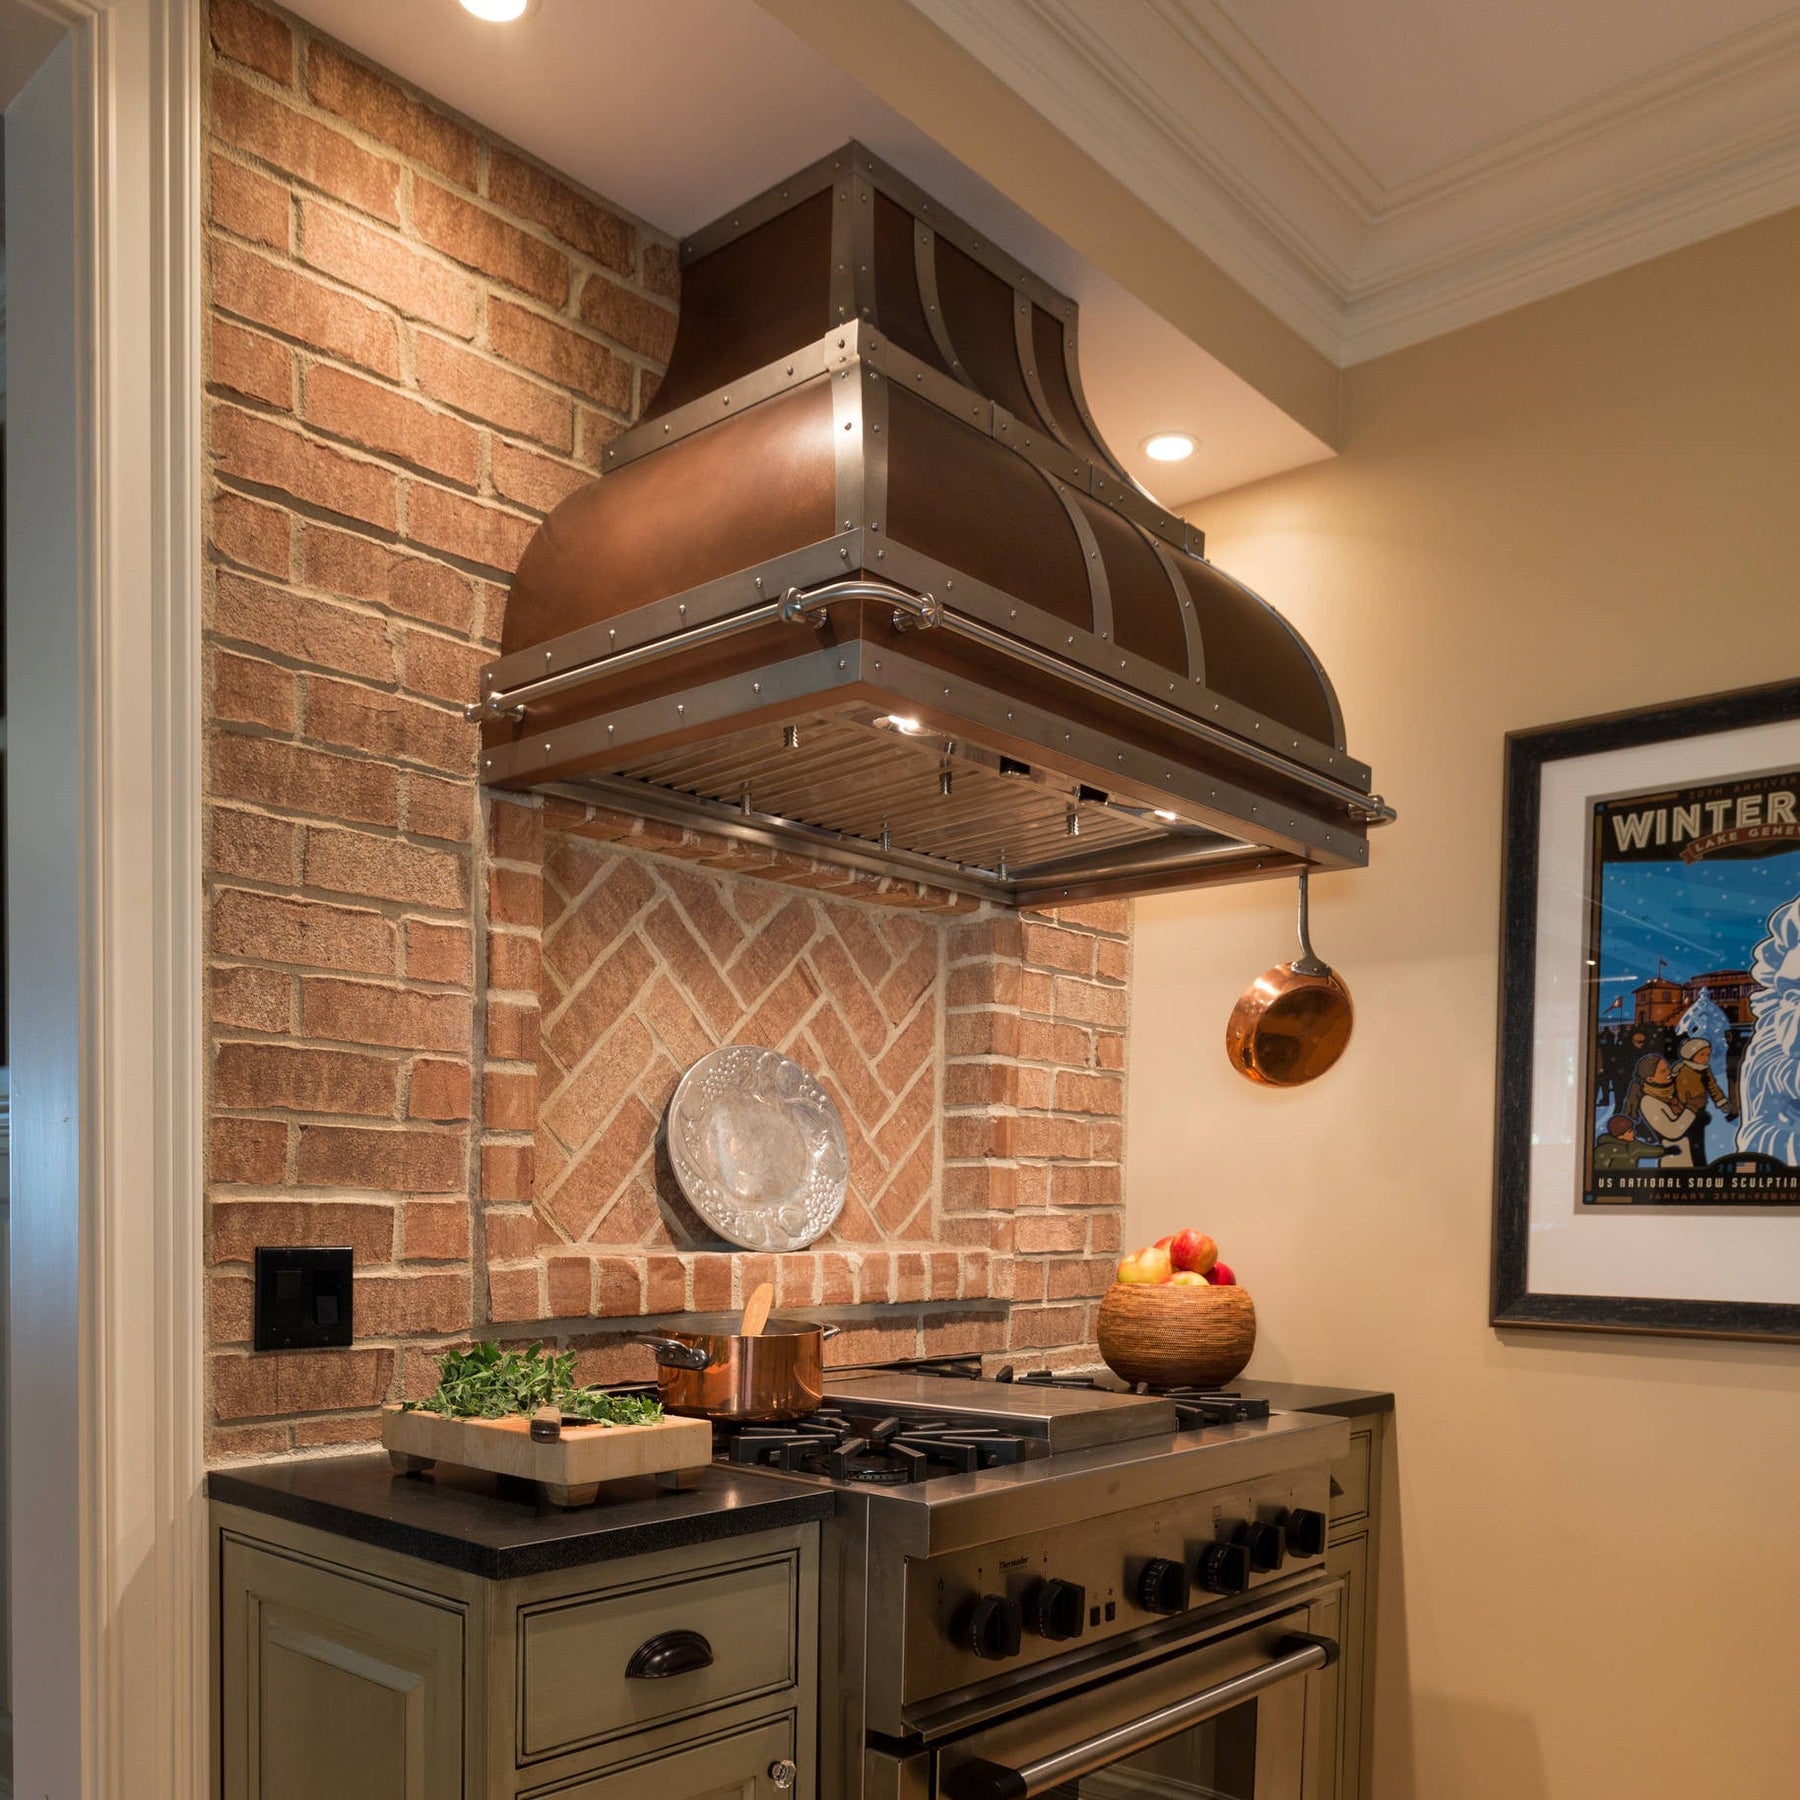 Oven Hood Design And Installation - Christopher Scott Cabinetry